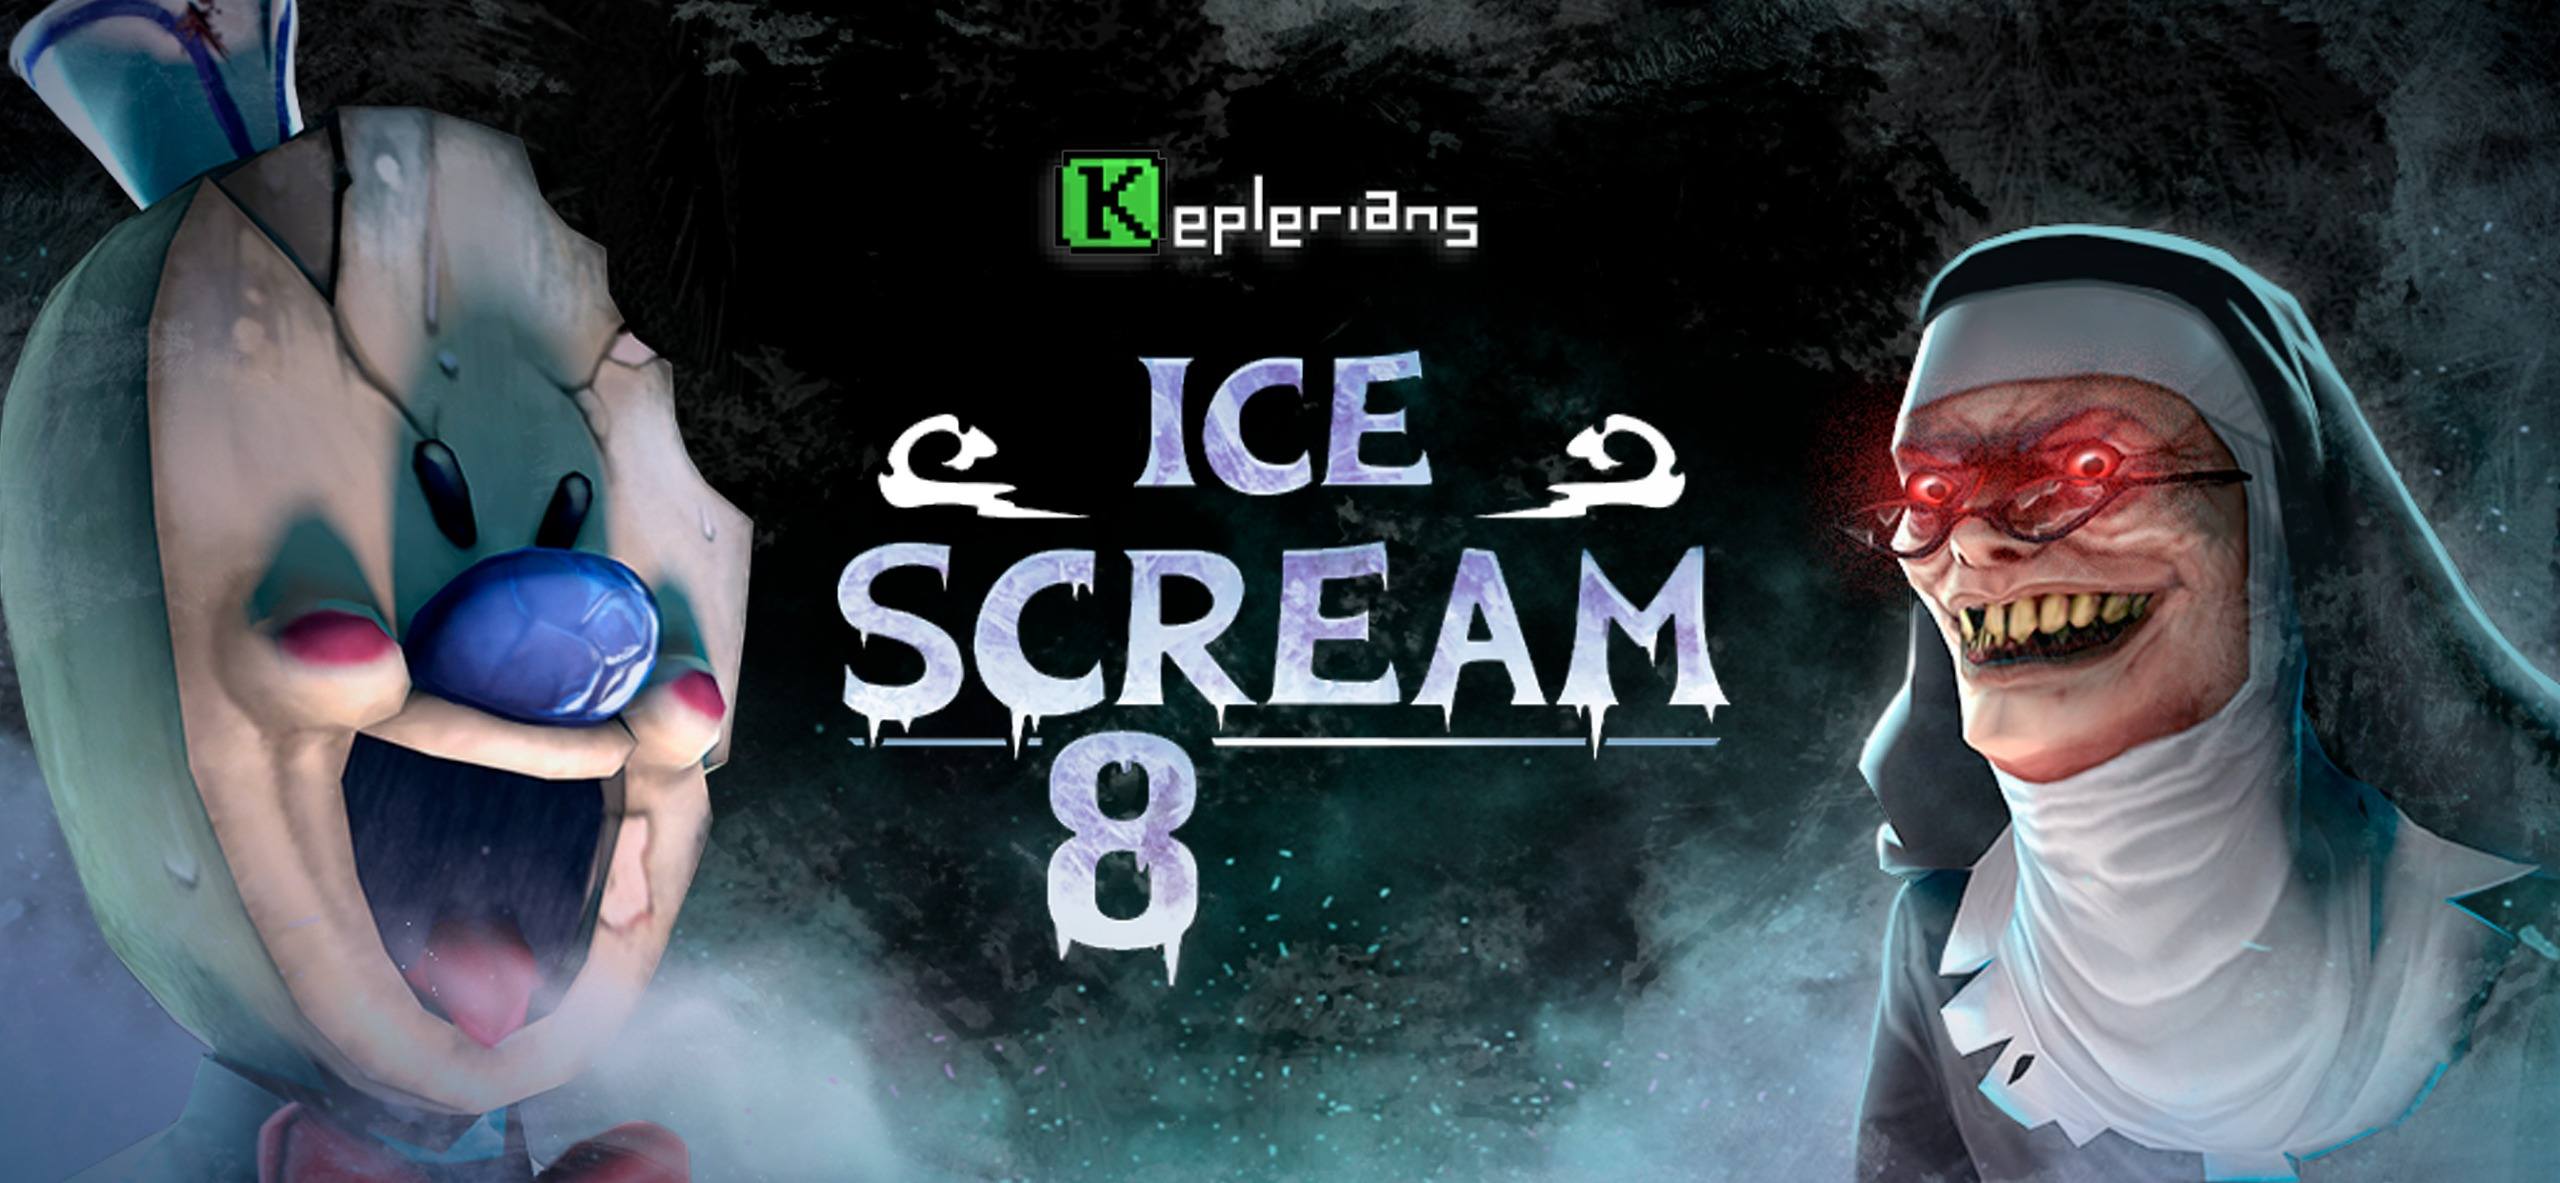 Ice Scream 8 Friends Early Access Game•Ice Scream 8 Official Game•Ice  Scream 8 Gameplay•FanMade 